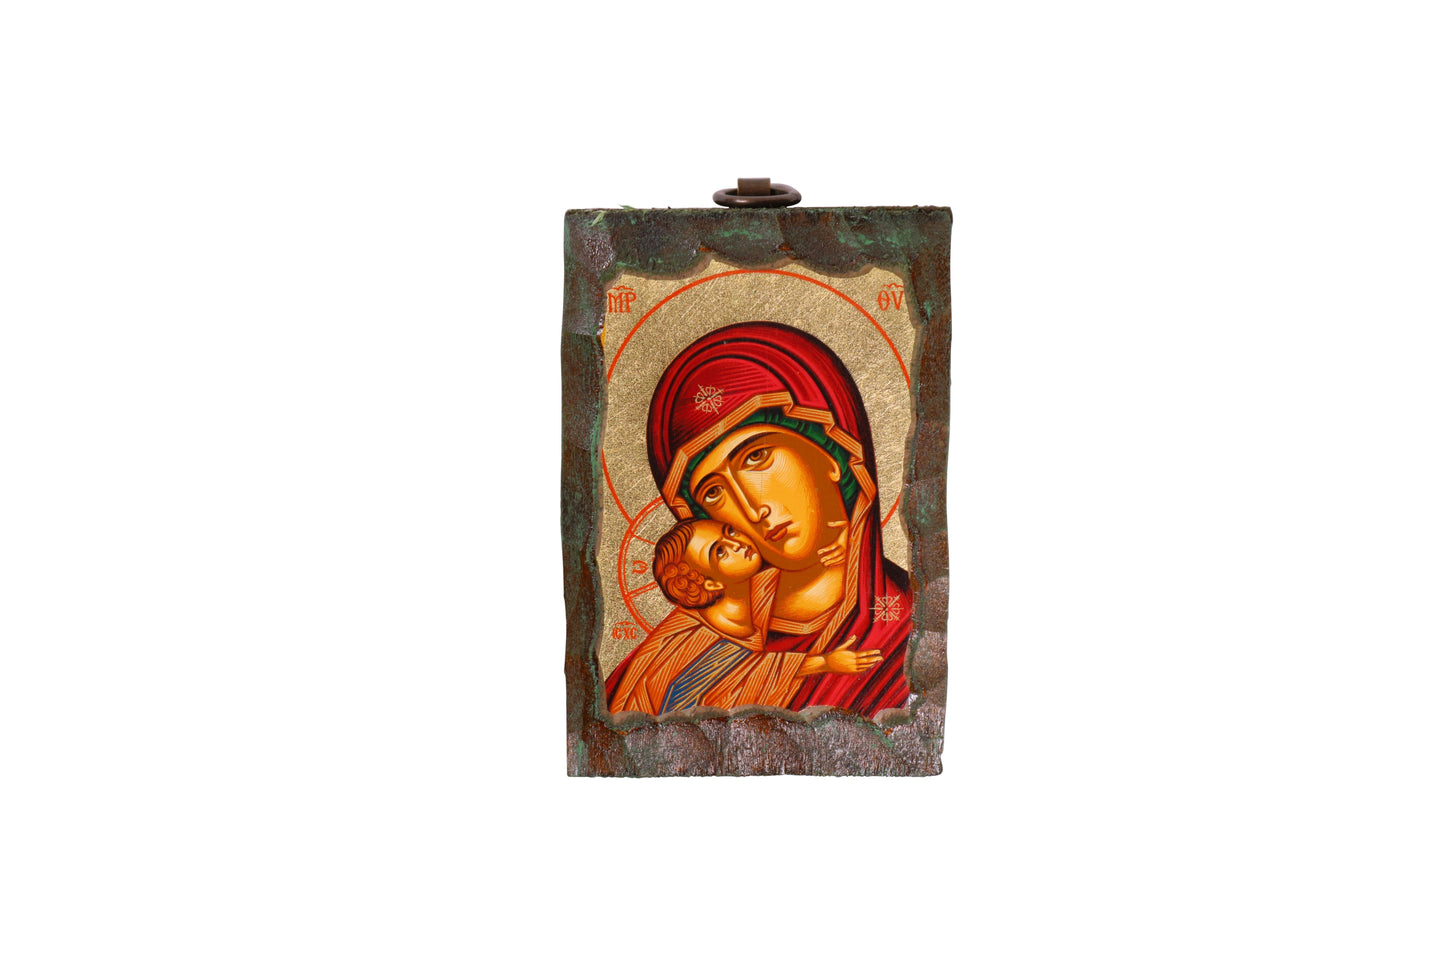 An icon of the Virgin Mary in a red robe holding the child Jesus, with both figures haloed against a gold leaf background. Above them are two angels, and the icon is bordered by a dark, textured frame with a metal loop at the top for hanging.